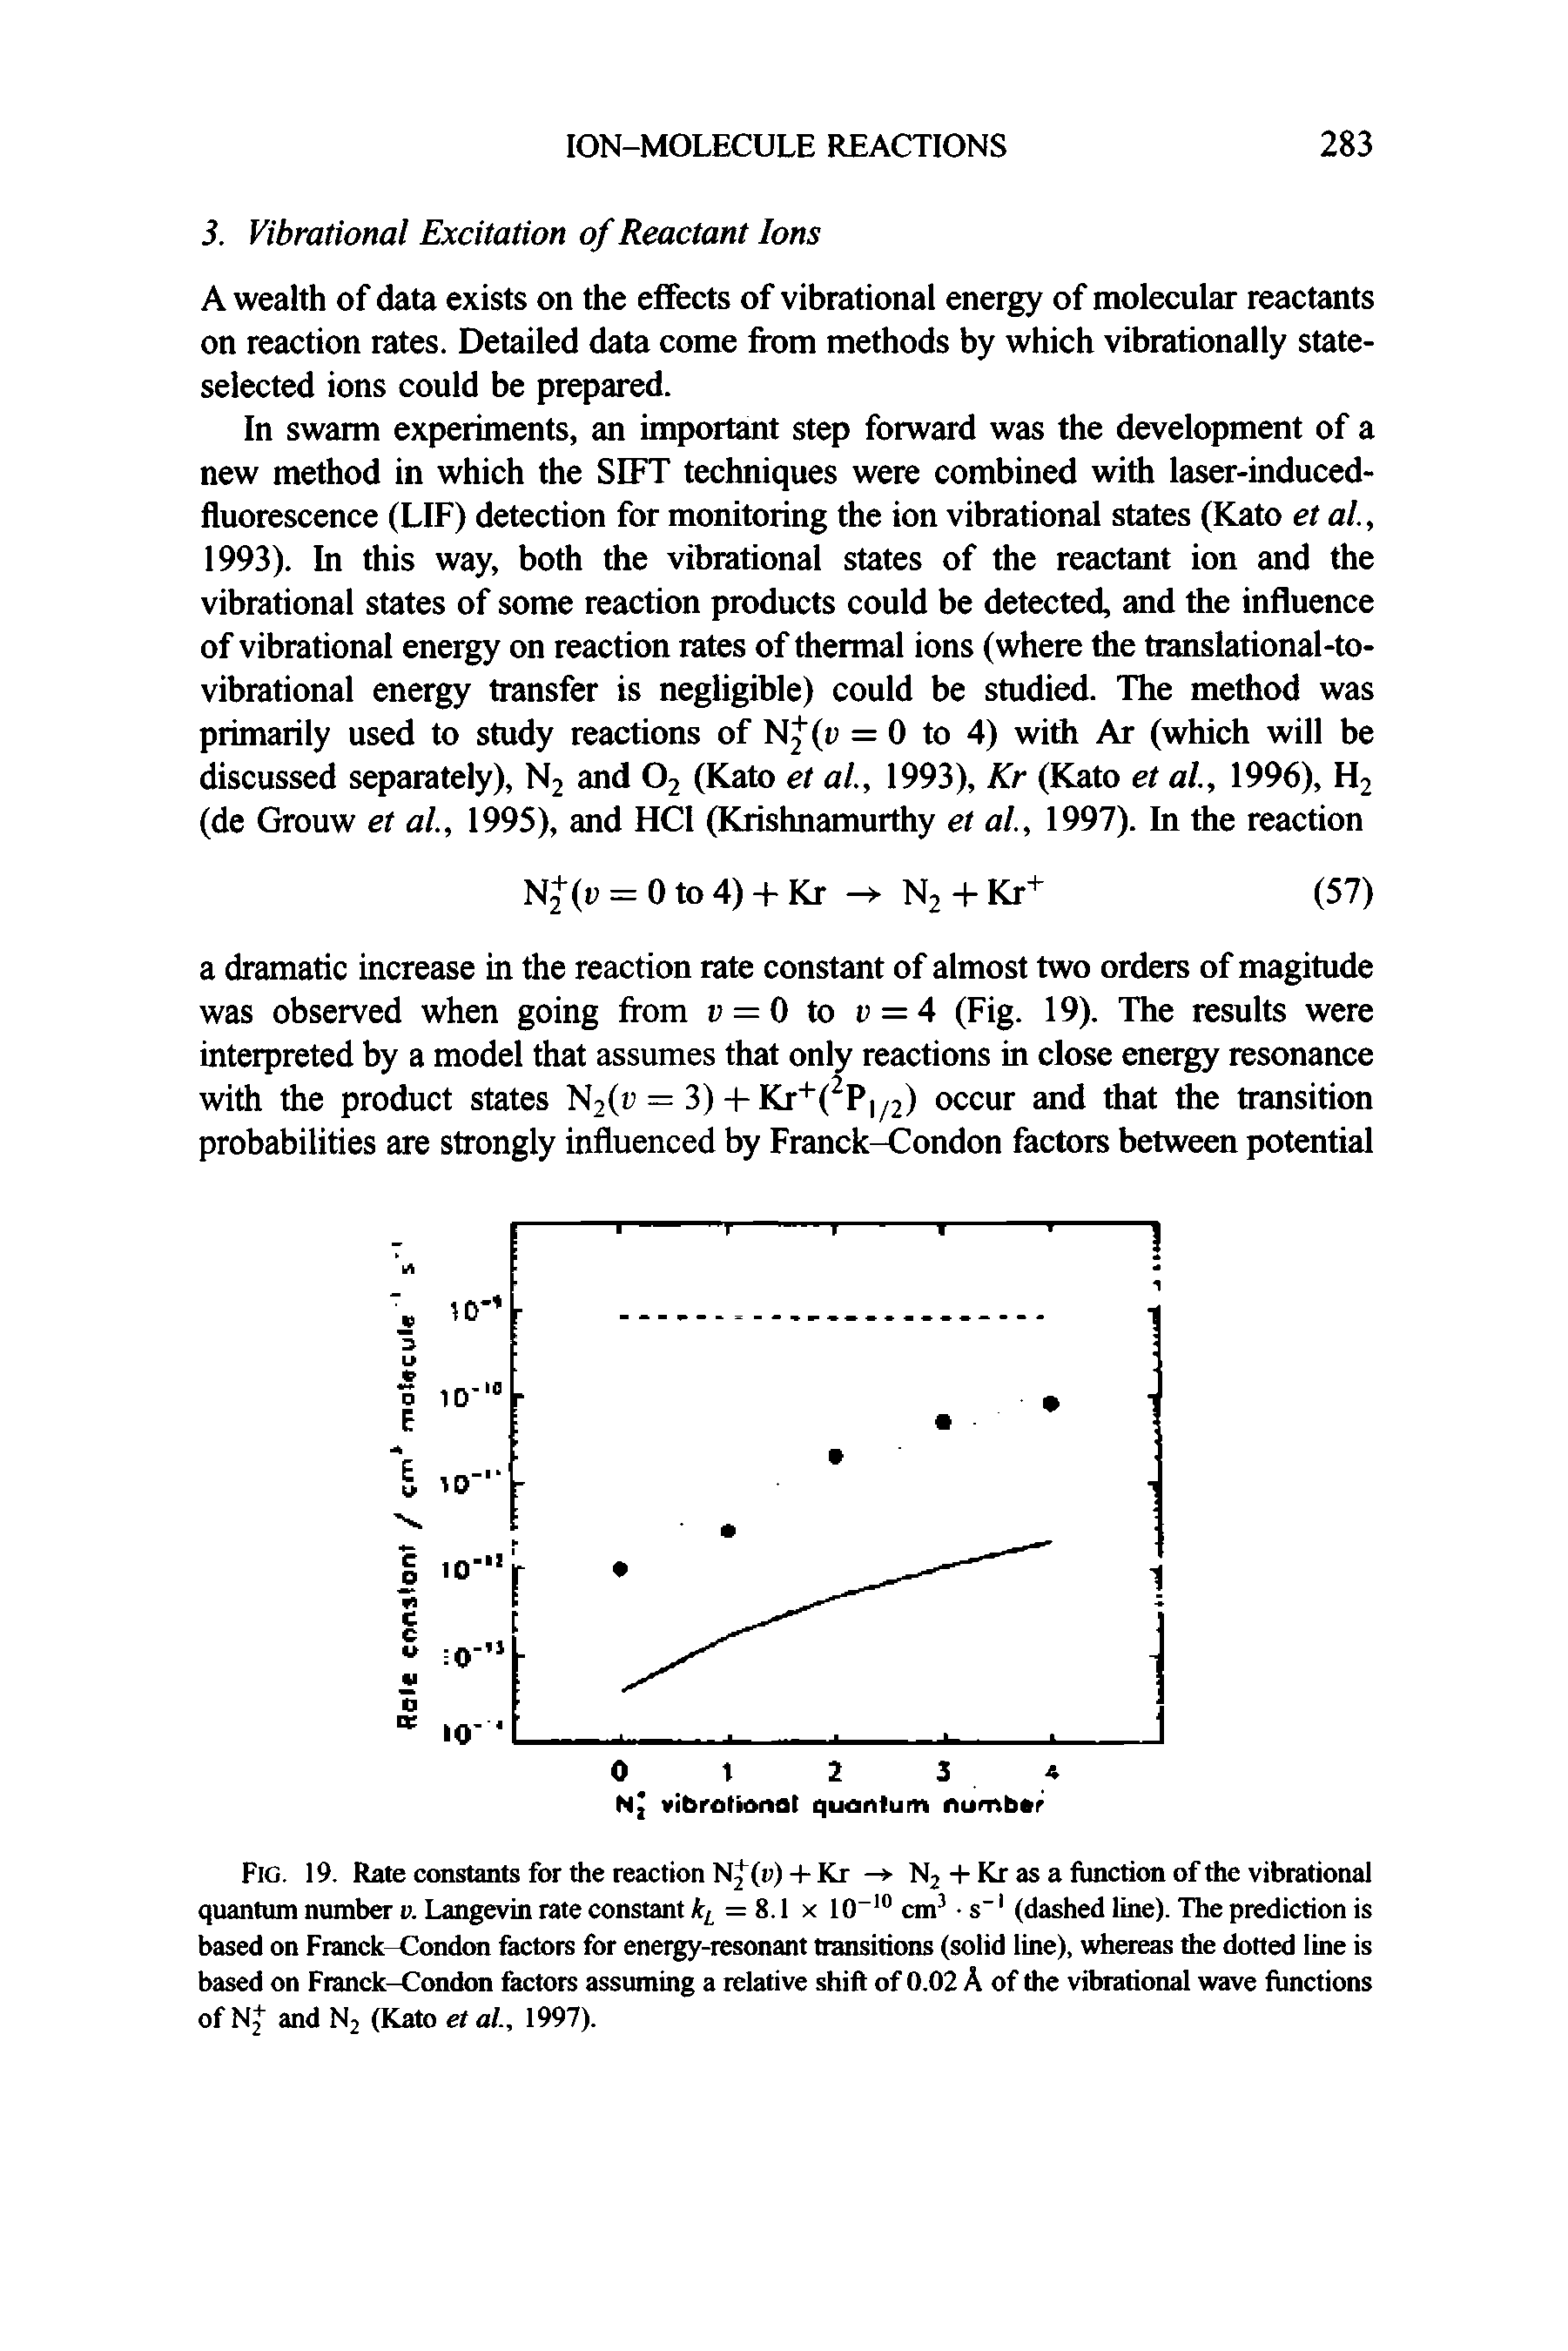 Fig. 19. Rate constants for the reaction NJ(d) -I- Kr - N2 + Kr as a function of the vibrational quantum number v. Langevin rate constant = 8.1 x 10 " cm s (dashed line). The prediction is based on Franck ondon factors for energy-resonant transitions (solid line), whereas the dotted line is based on Franck-Condon factors assuming a relative shift of 0.02 A of the vibrational wave functions of and N2 (Kato eta/., 1997).